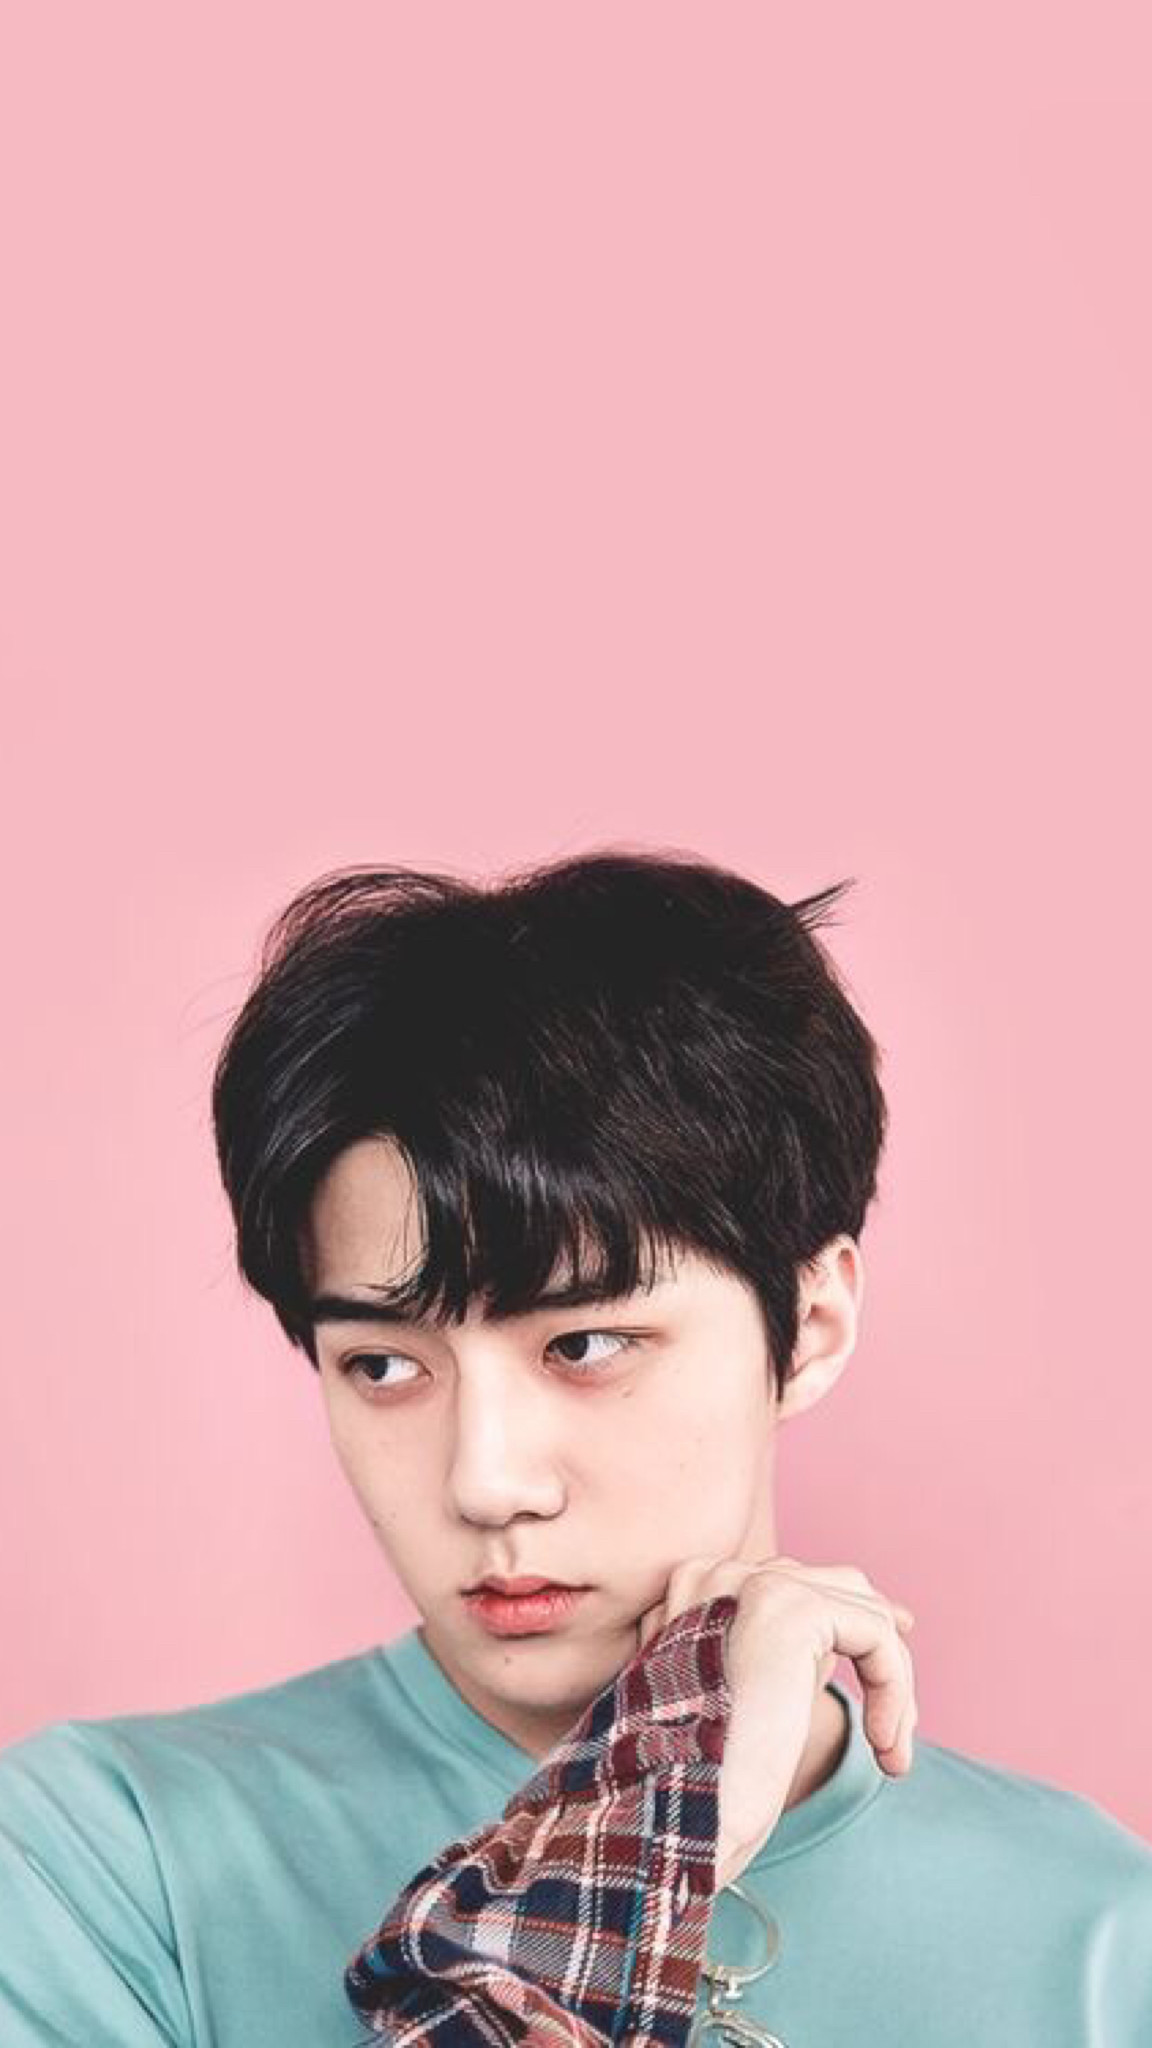 exo wallpaper iphone,hair,face,forehead,hairstyle,chin